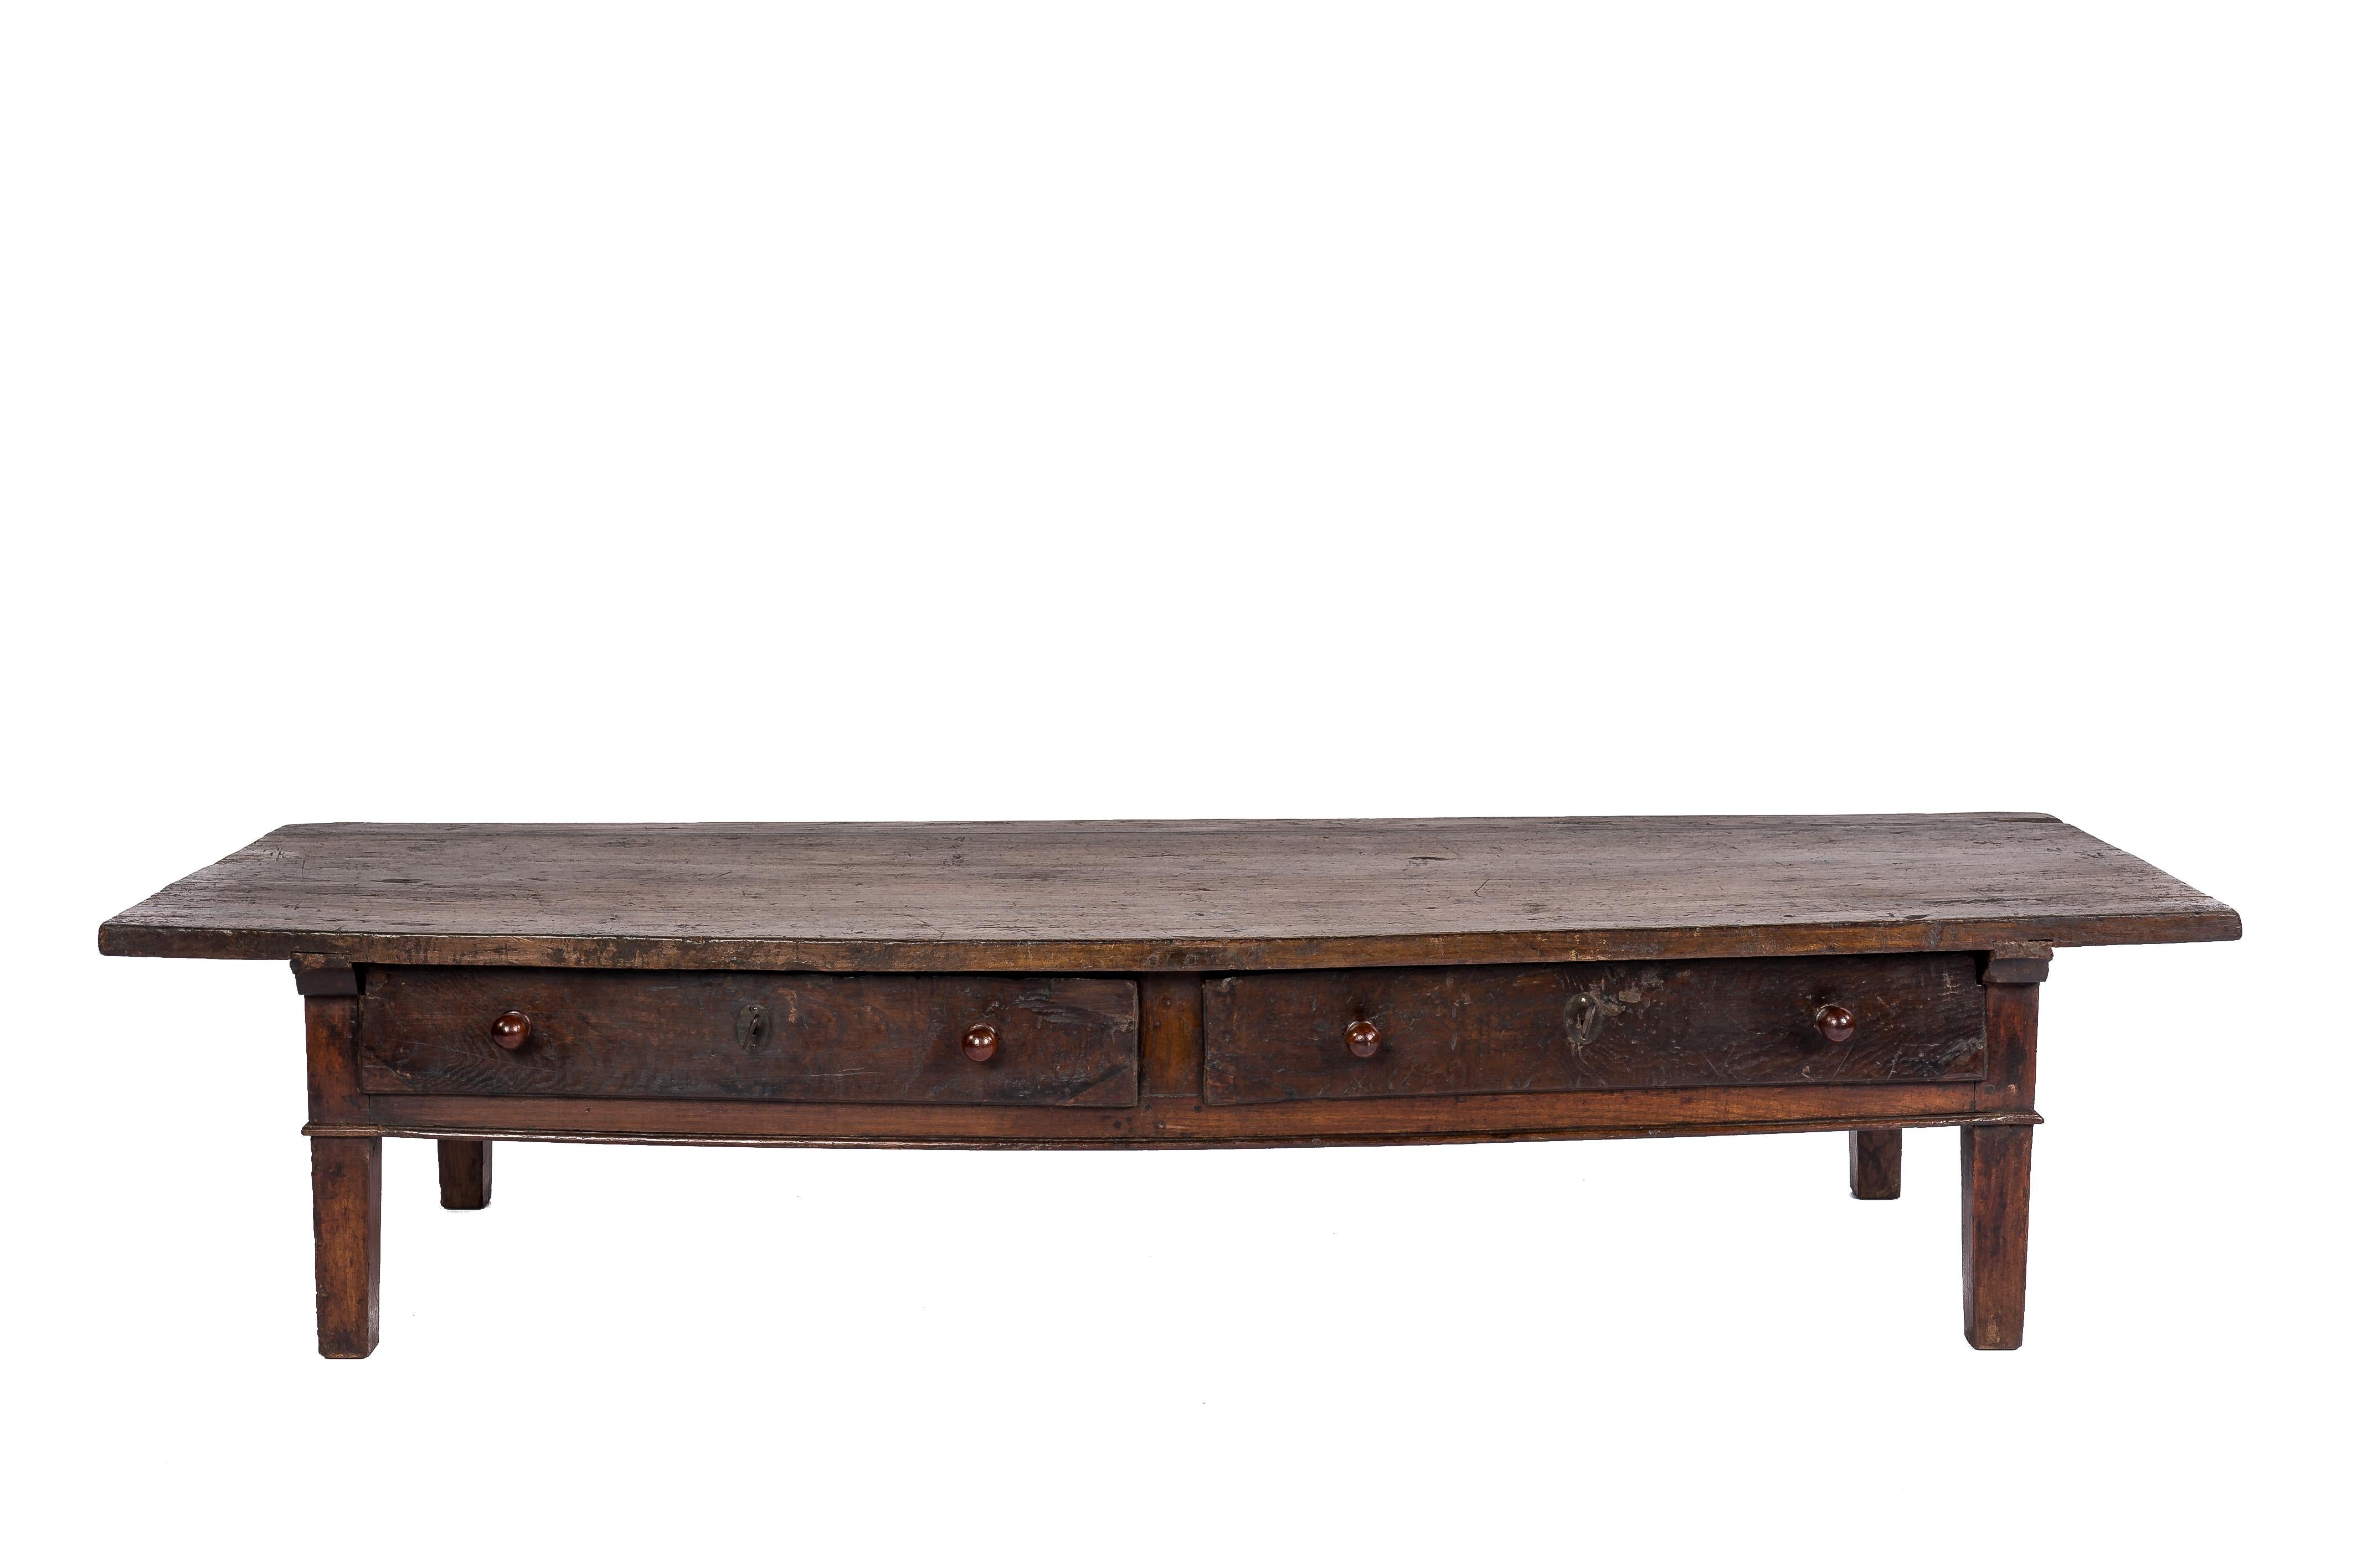 This beautiful warm brown color rustic coffee table or low table originates in rural Spain and dates circa 1770. The table is exceptionally long and has a unique top that was made from a very wide and narrow board of solid chestnut wood that is 1.4